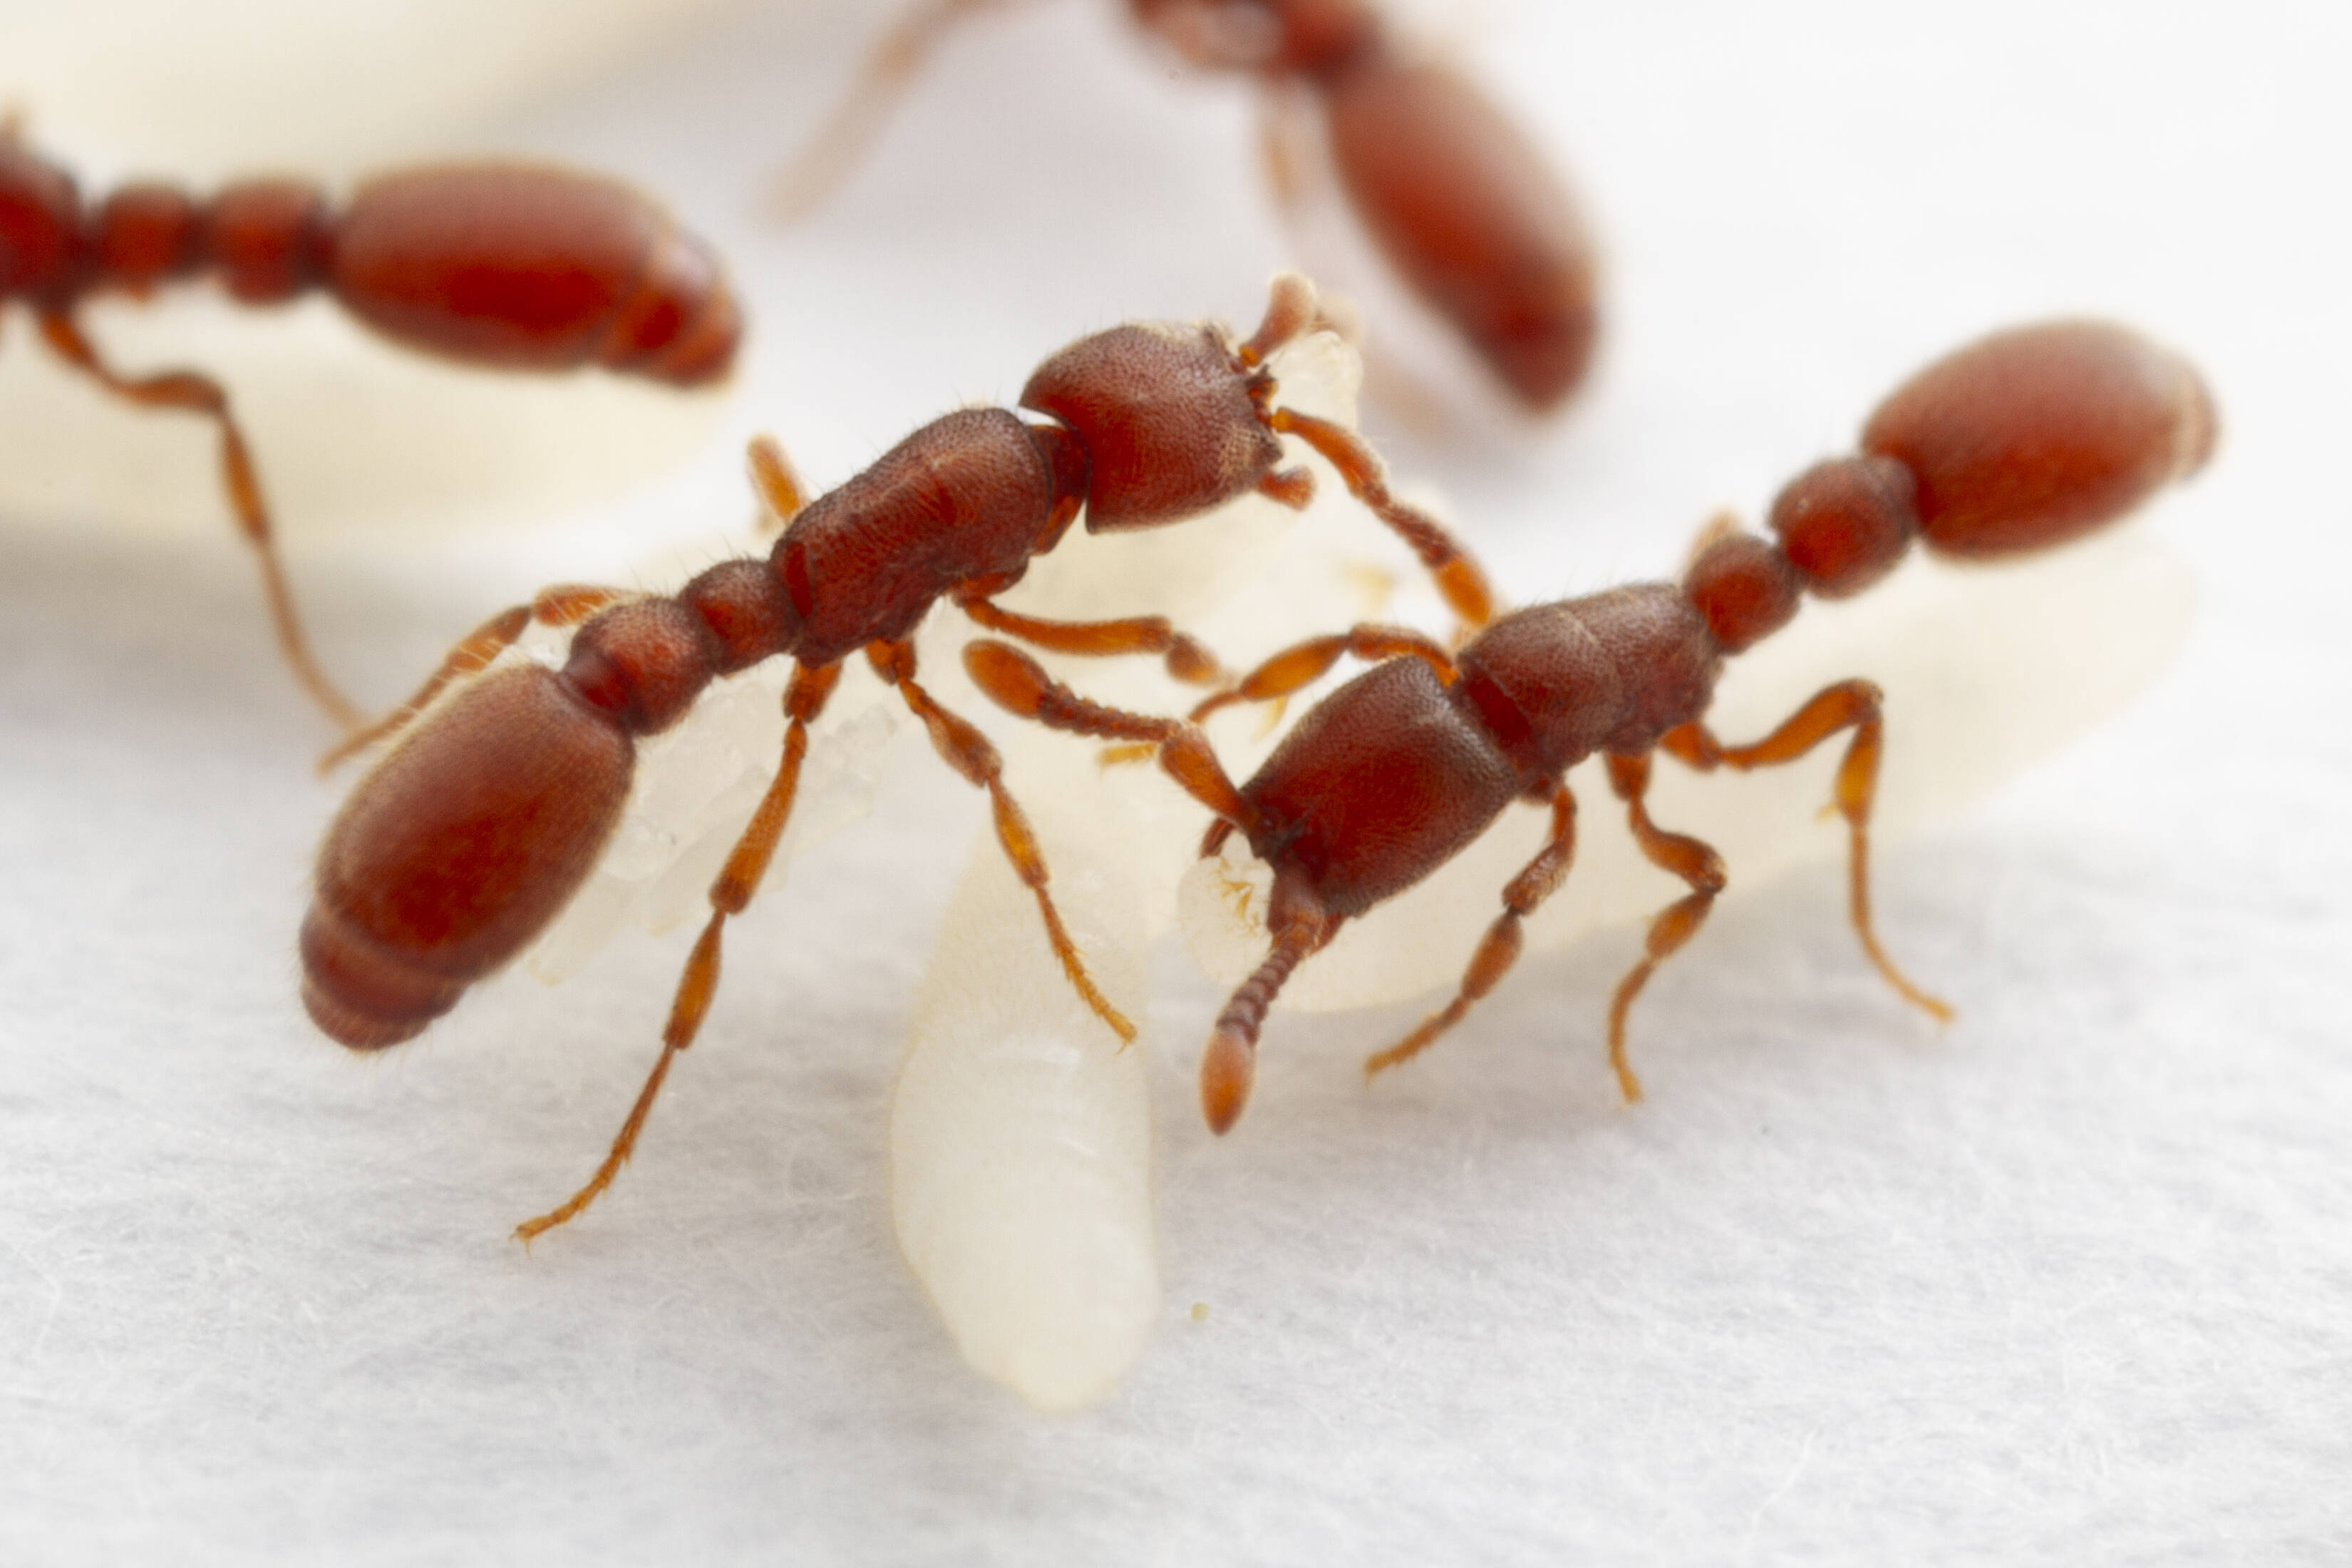 Red ants tend to their white larvae